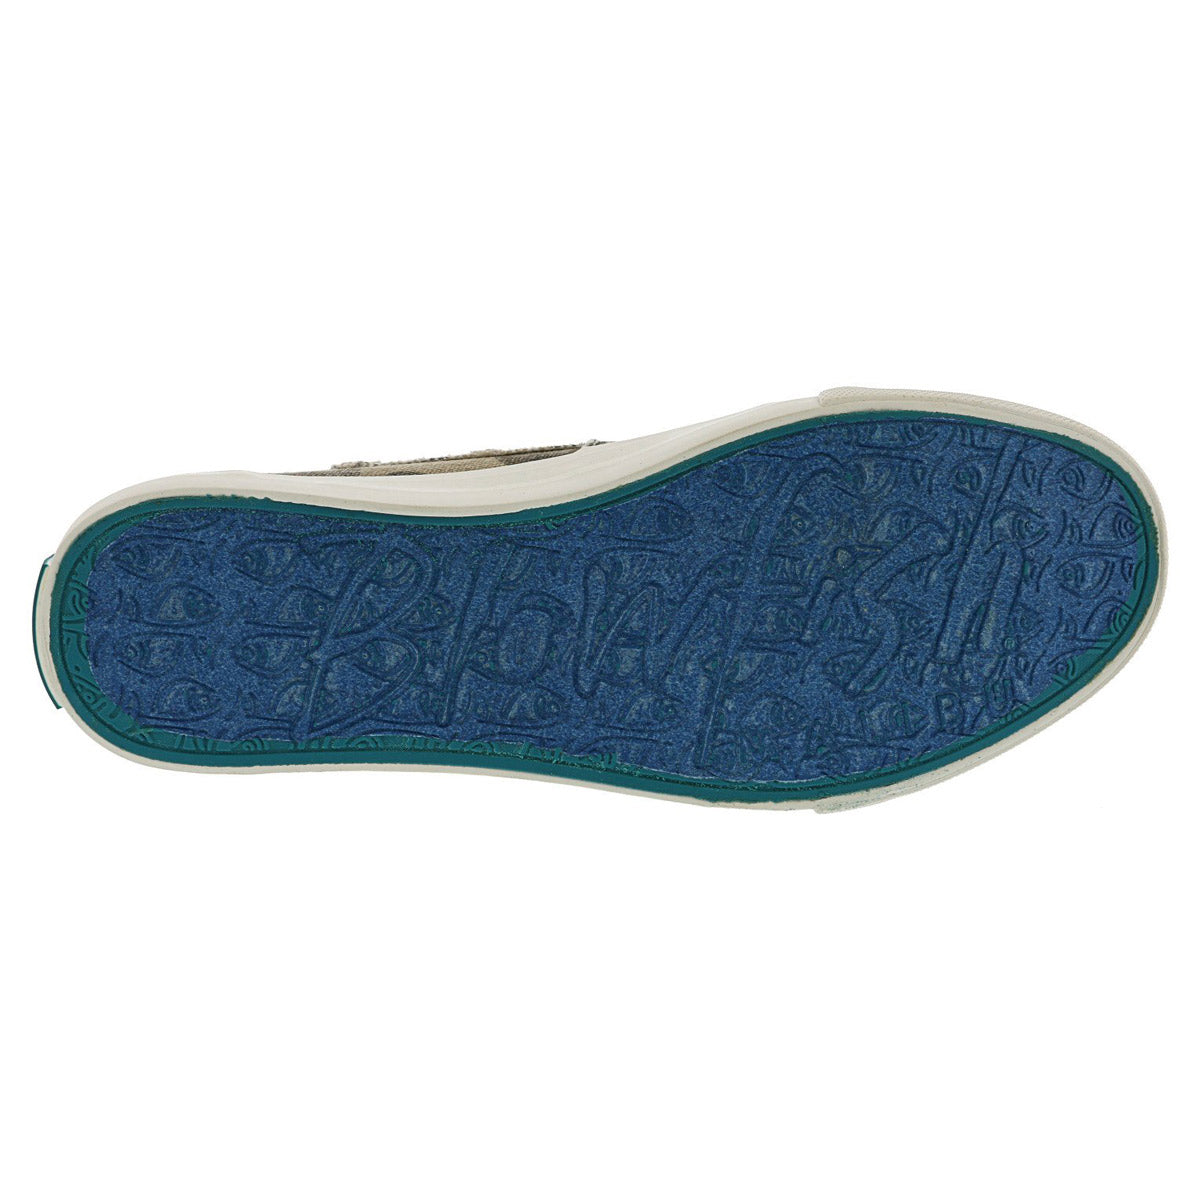 A Blowfish women&#39;s shoe with a blue sole showing tread patterns.